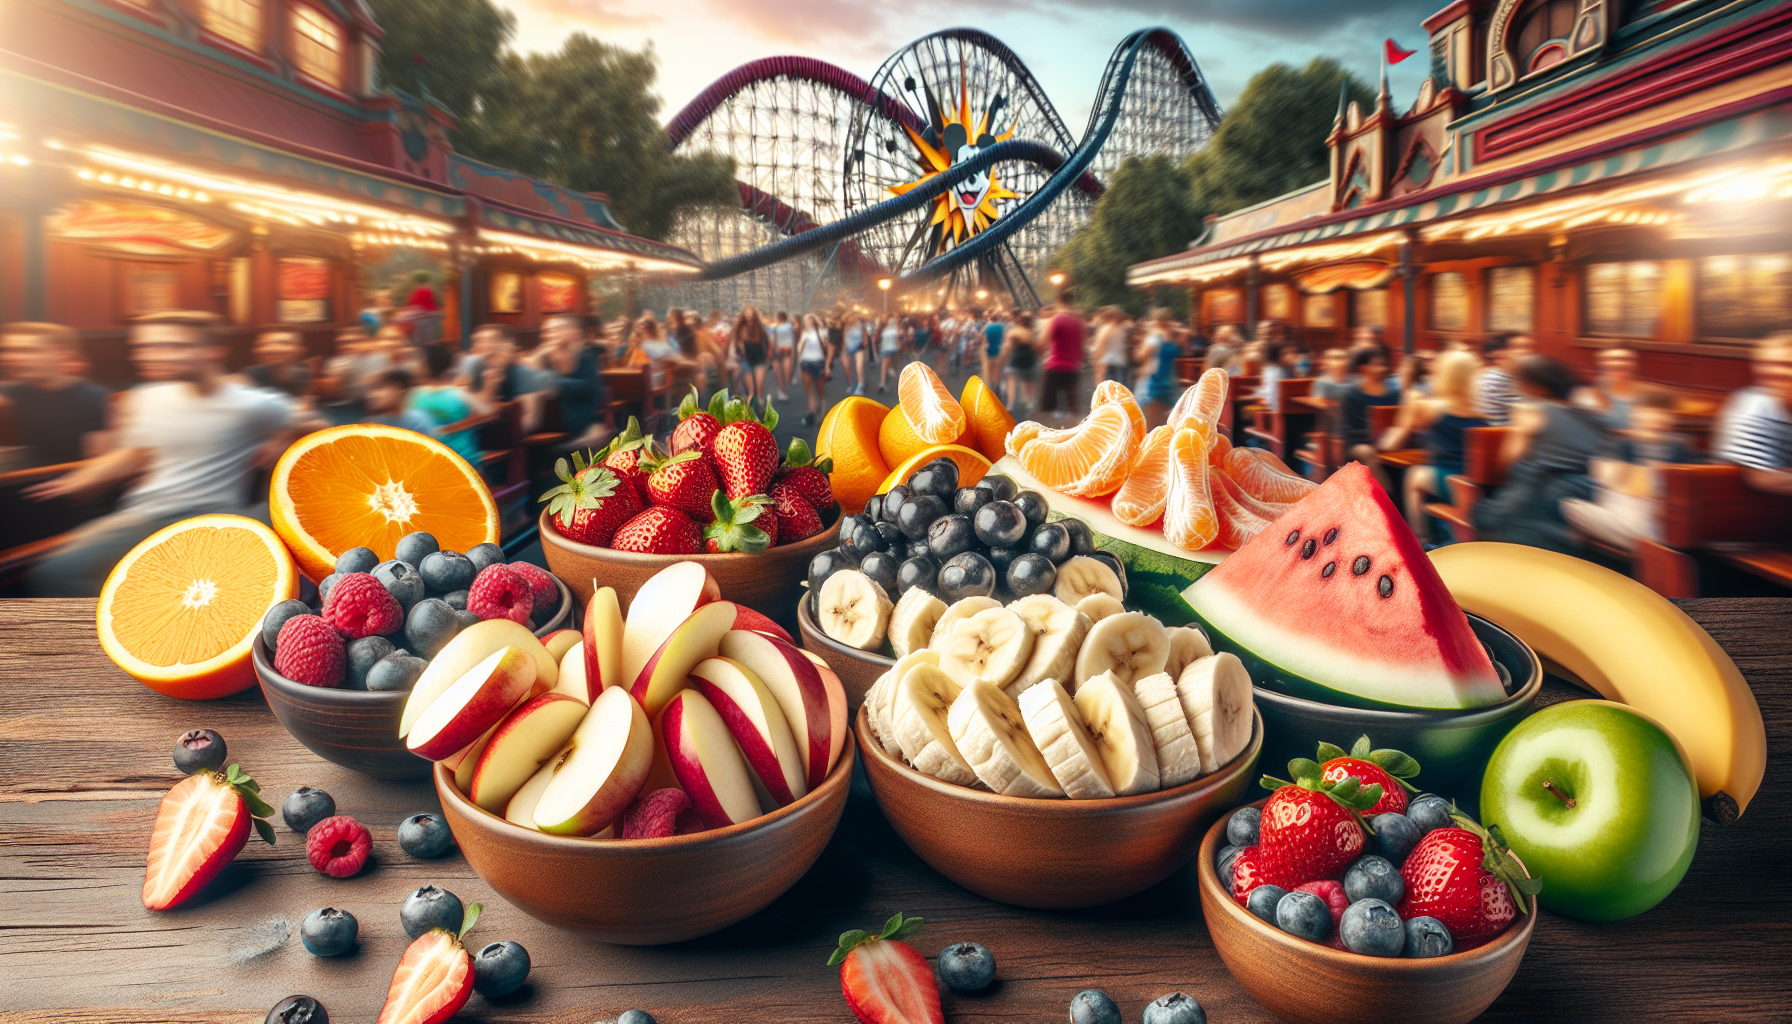 What Are Some Healthy Snacks I Can Eat While At A Theme Park?